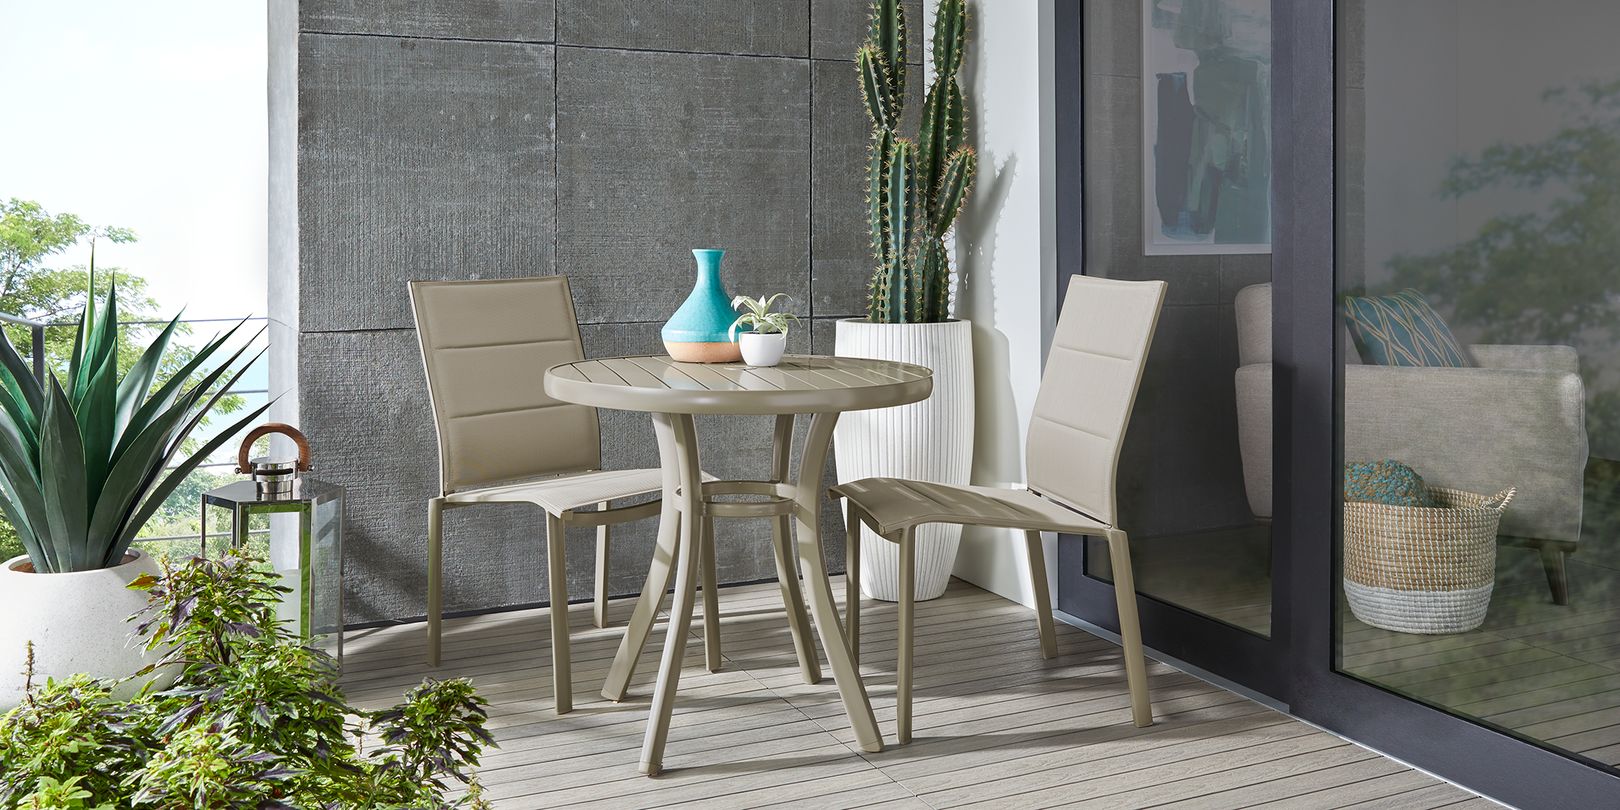 Photo of small tan dining set on a balcony with plants